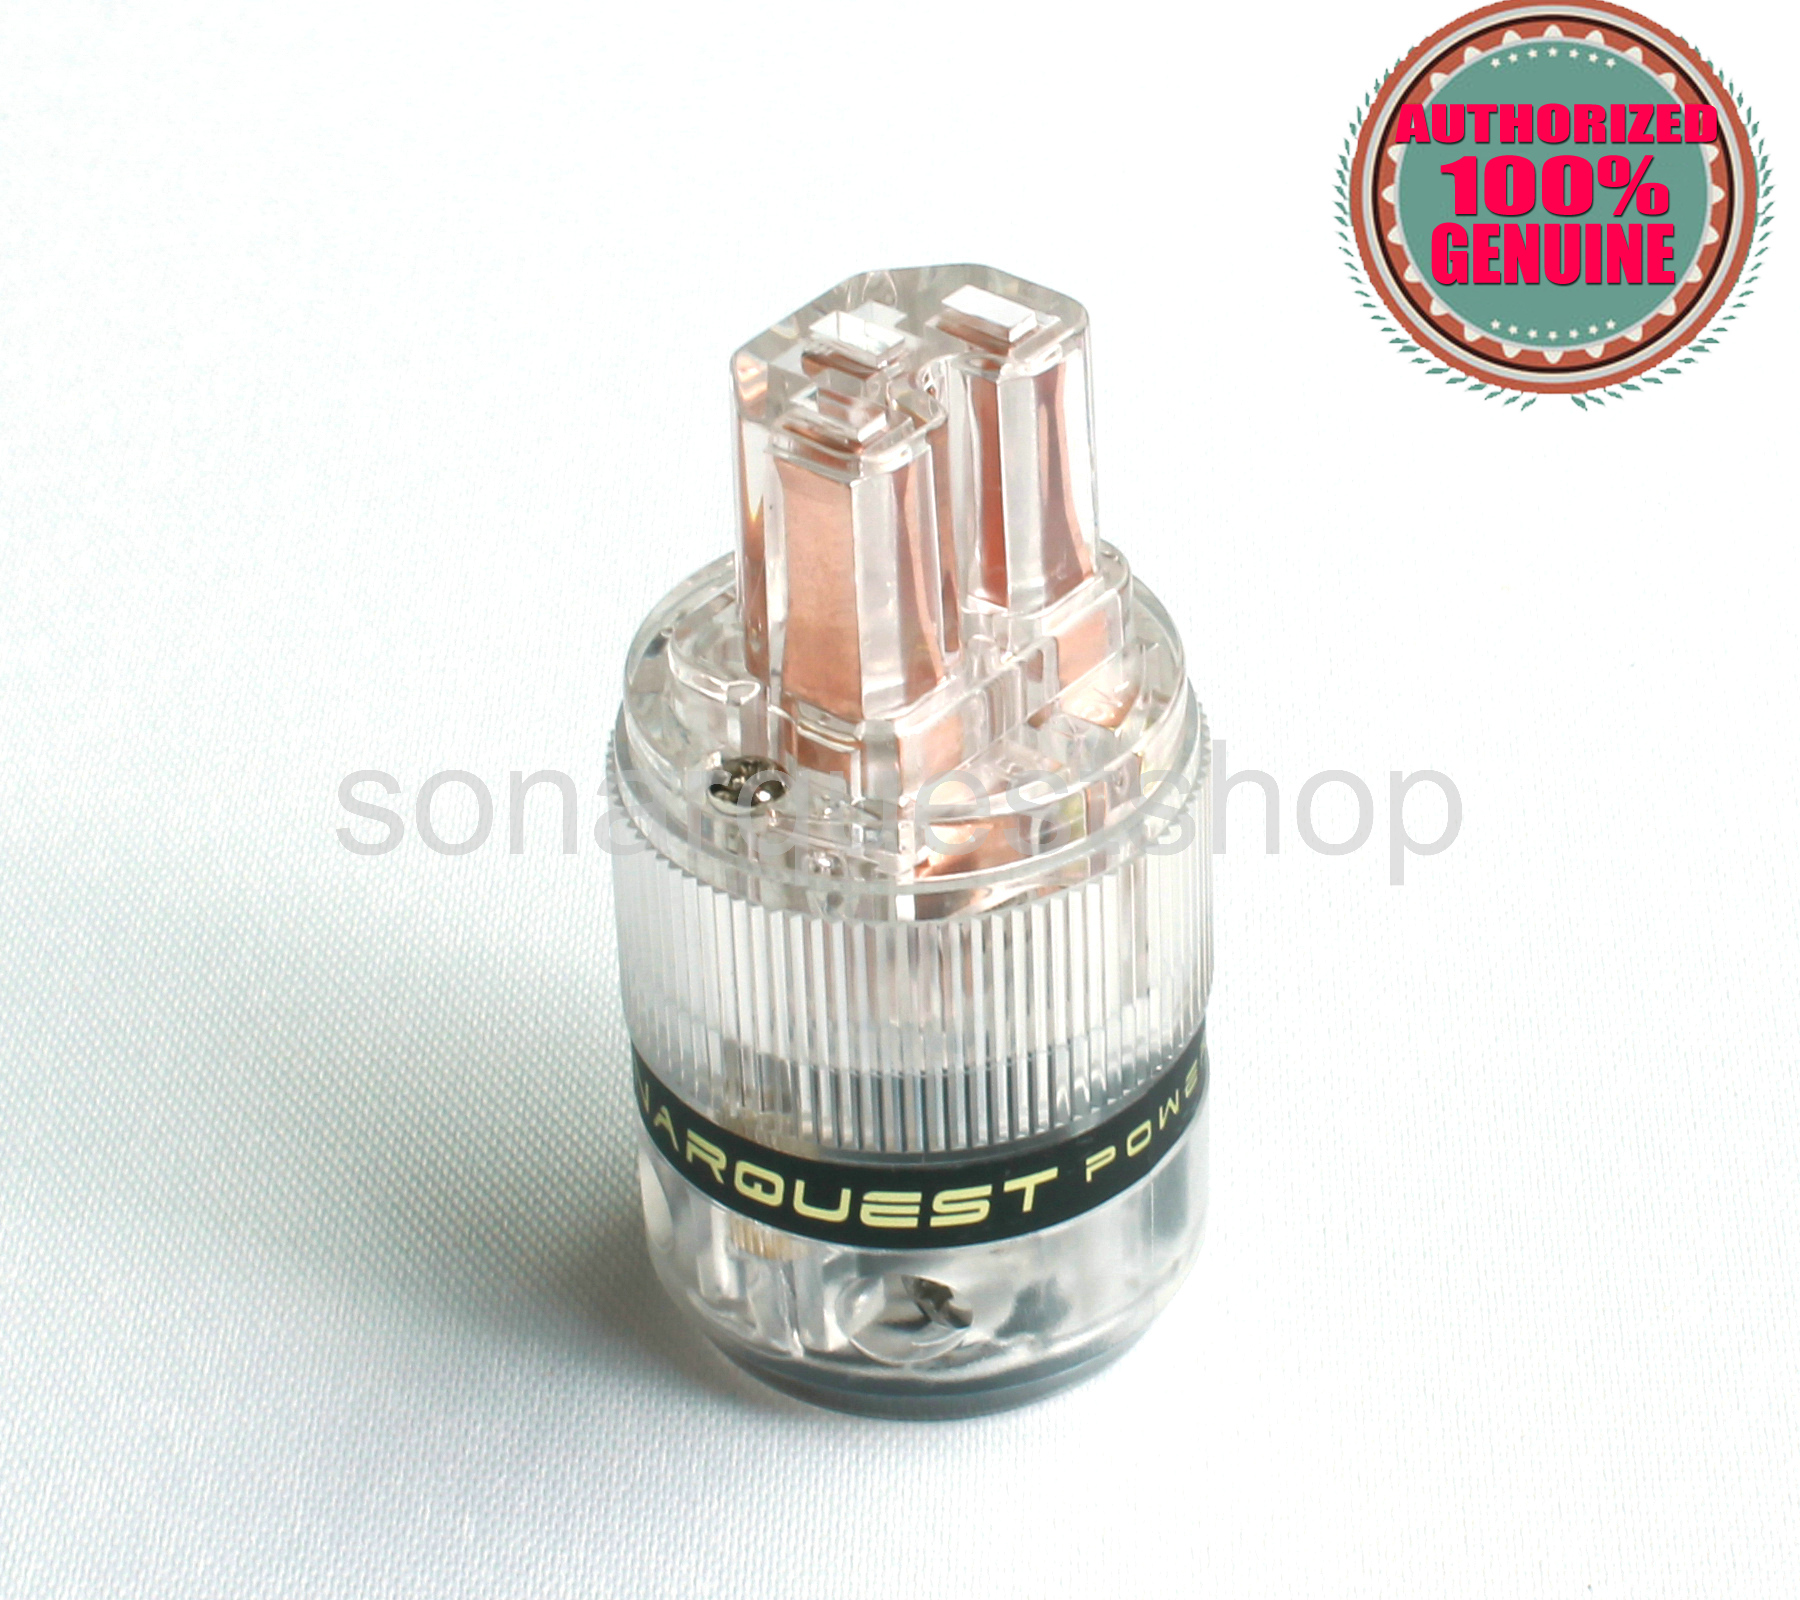 SONARQUEST ST-RC(T) Red Copper ALL Transparent IEC Connector